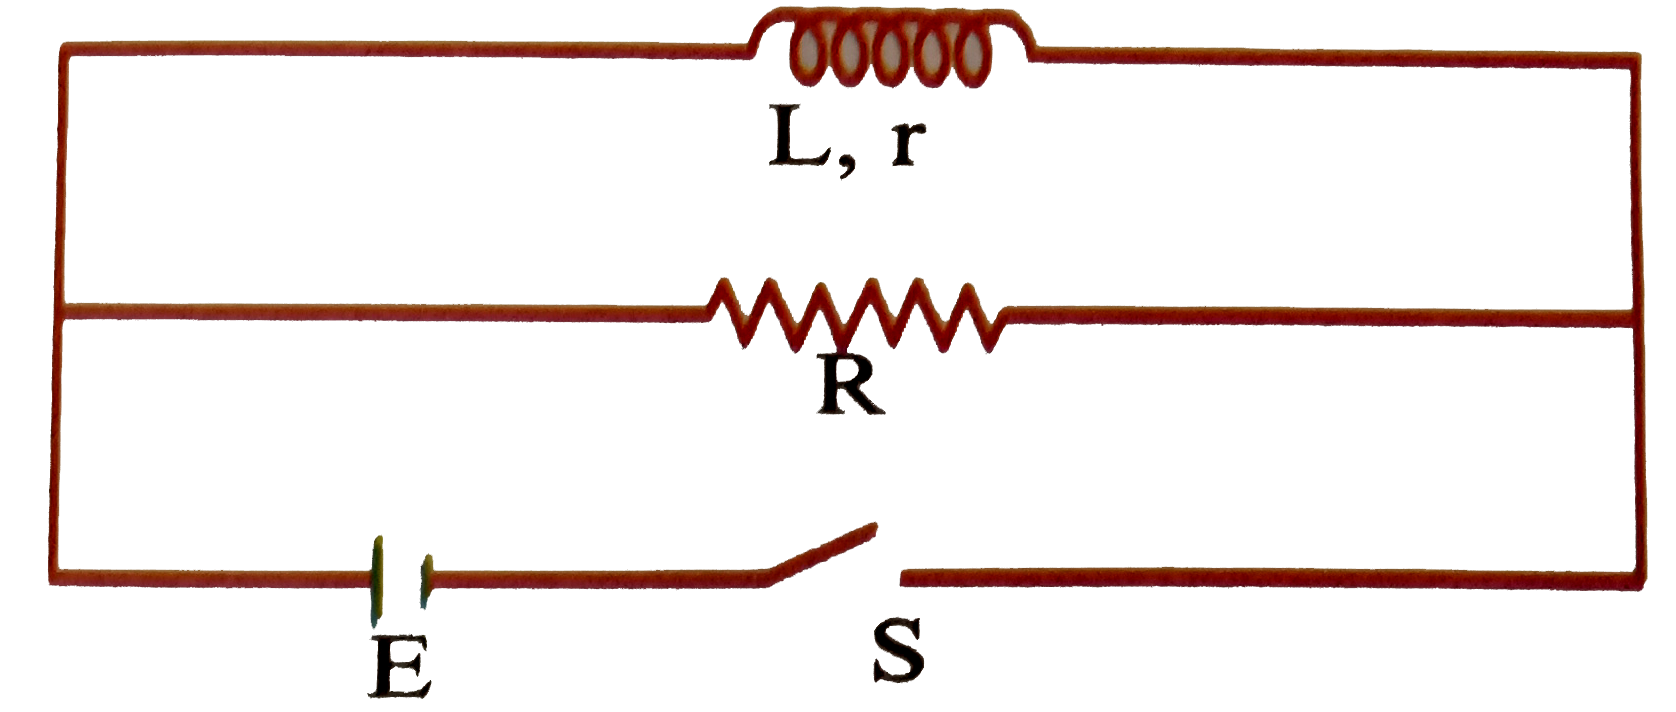 For the circuit shown, initially 'S' is closed for a long time so that steady has been reached. Then at t = 0, 'S' is opened, due to which the current decays to zero. The heat generated in inductor is.